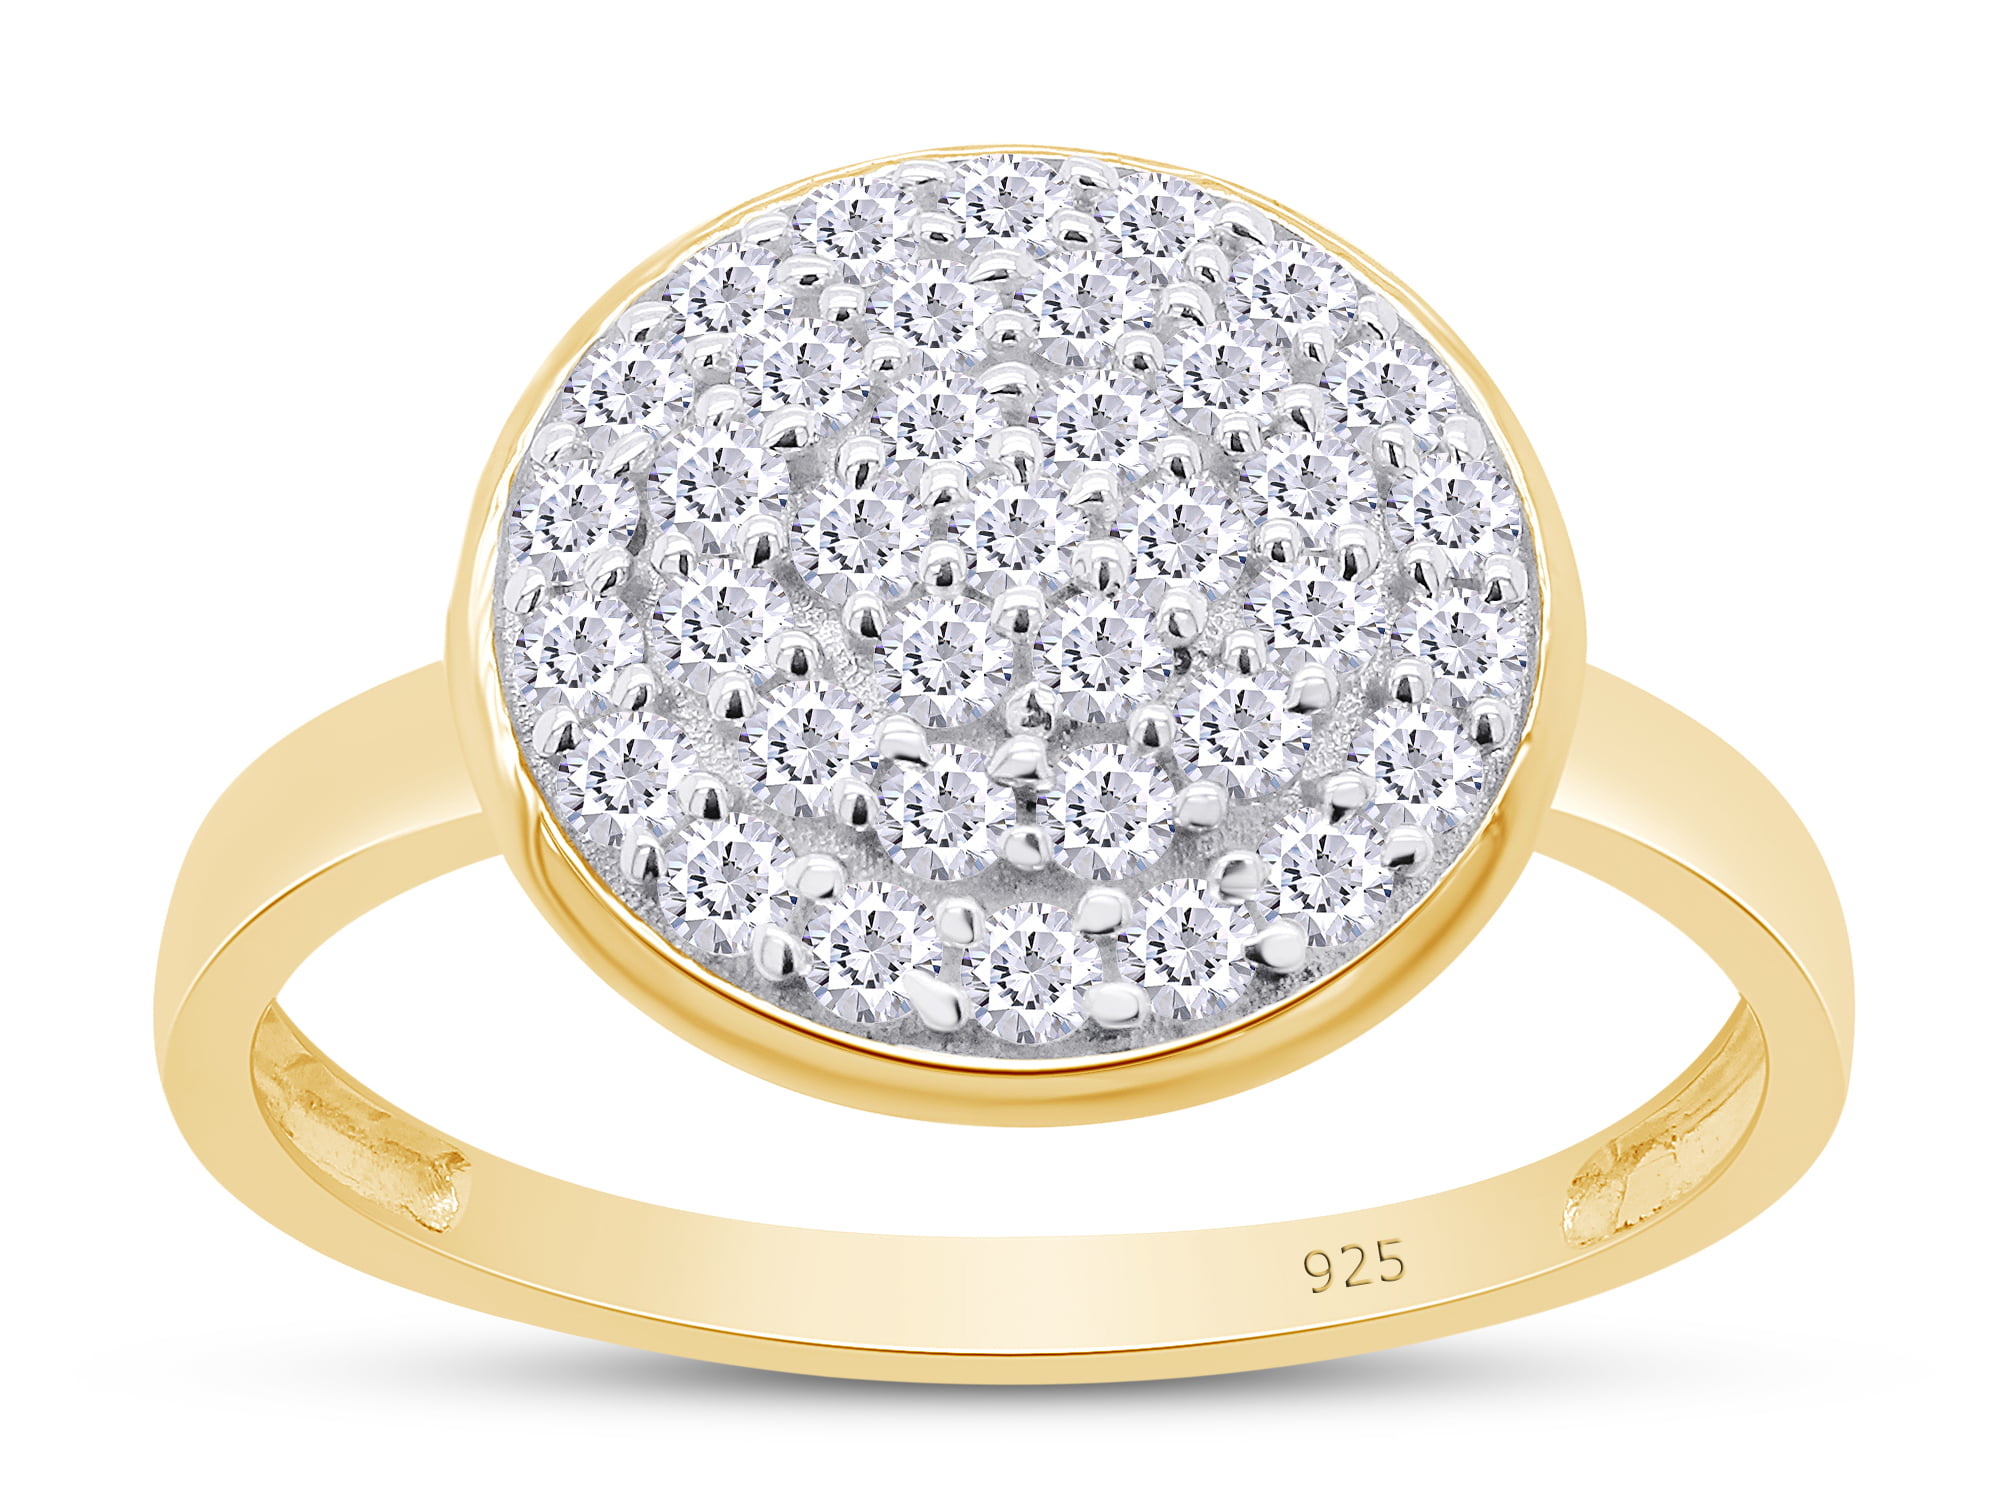 Wishrocks Round Cut White Cubic Zirconia Halo Engagement Ring in 14K Yellow Gold Over Sterling Silver